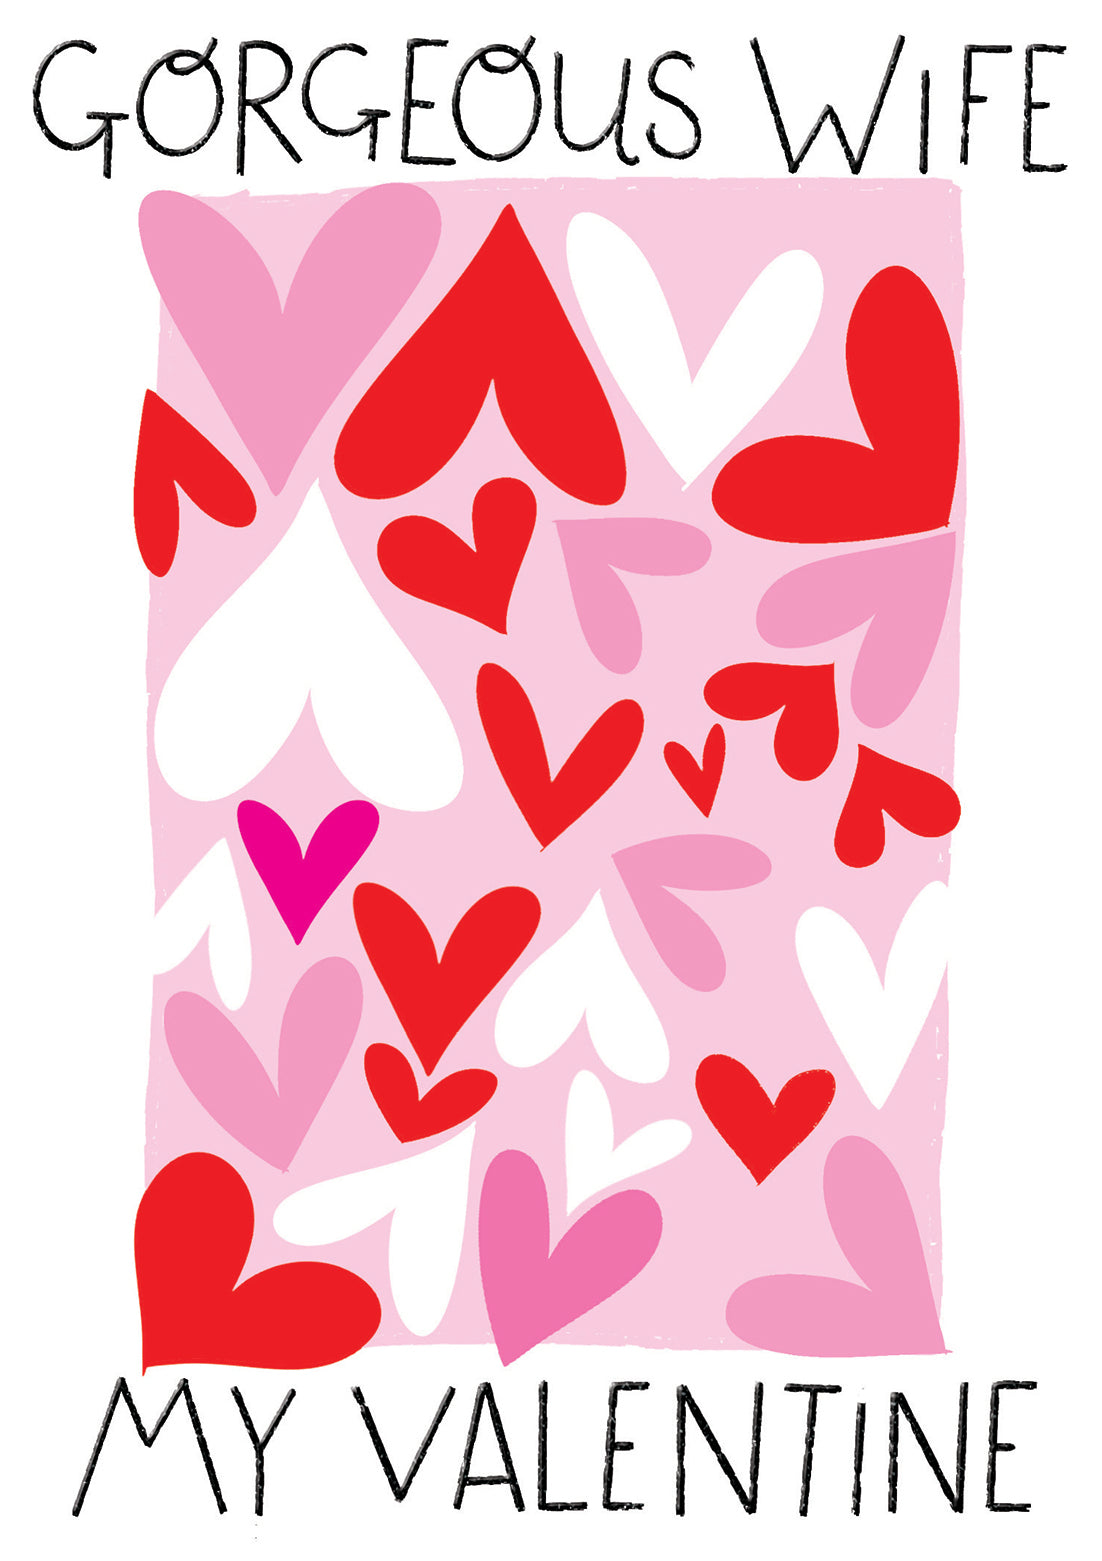 Gorgeous Wife On Valentine's Day Card by penny black